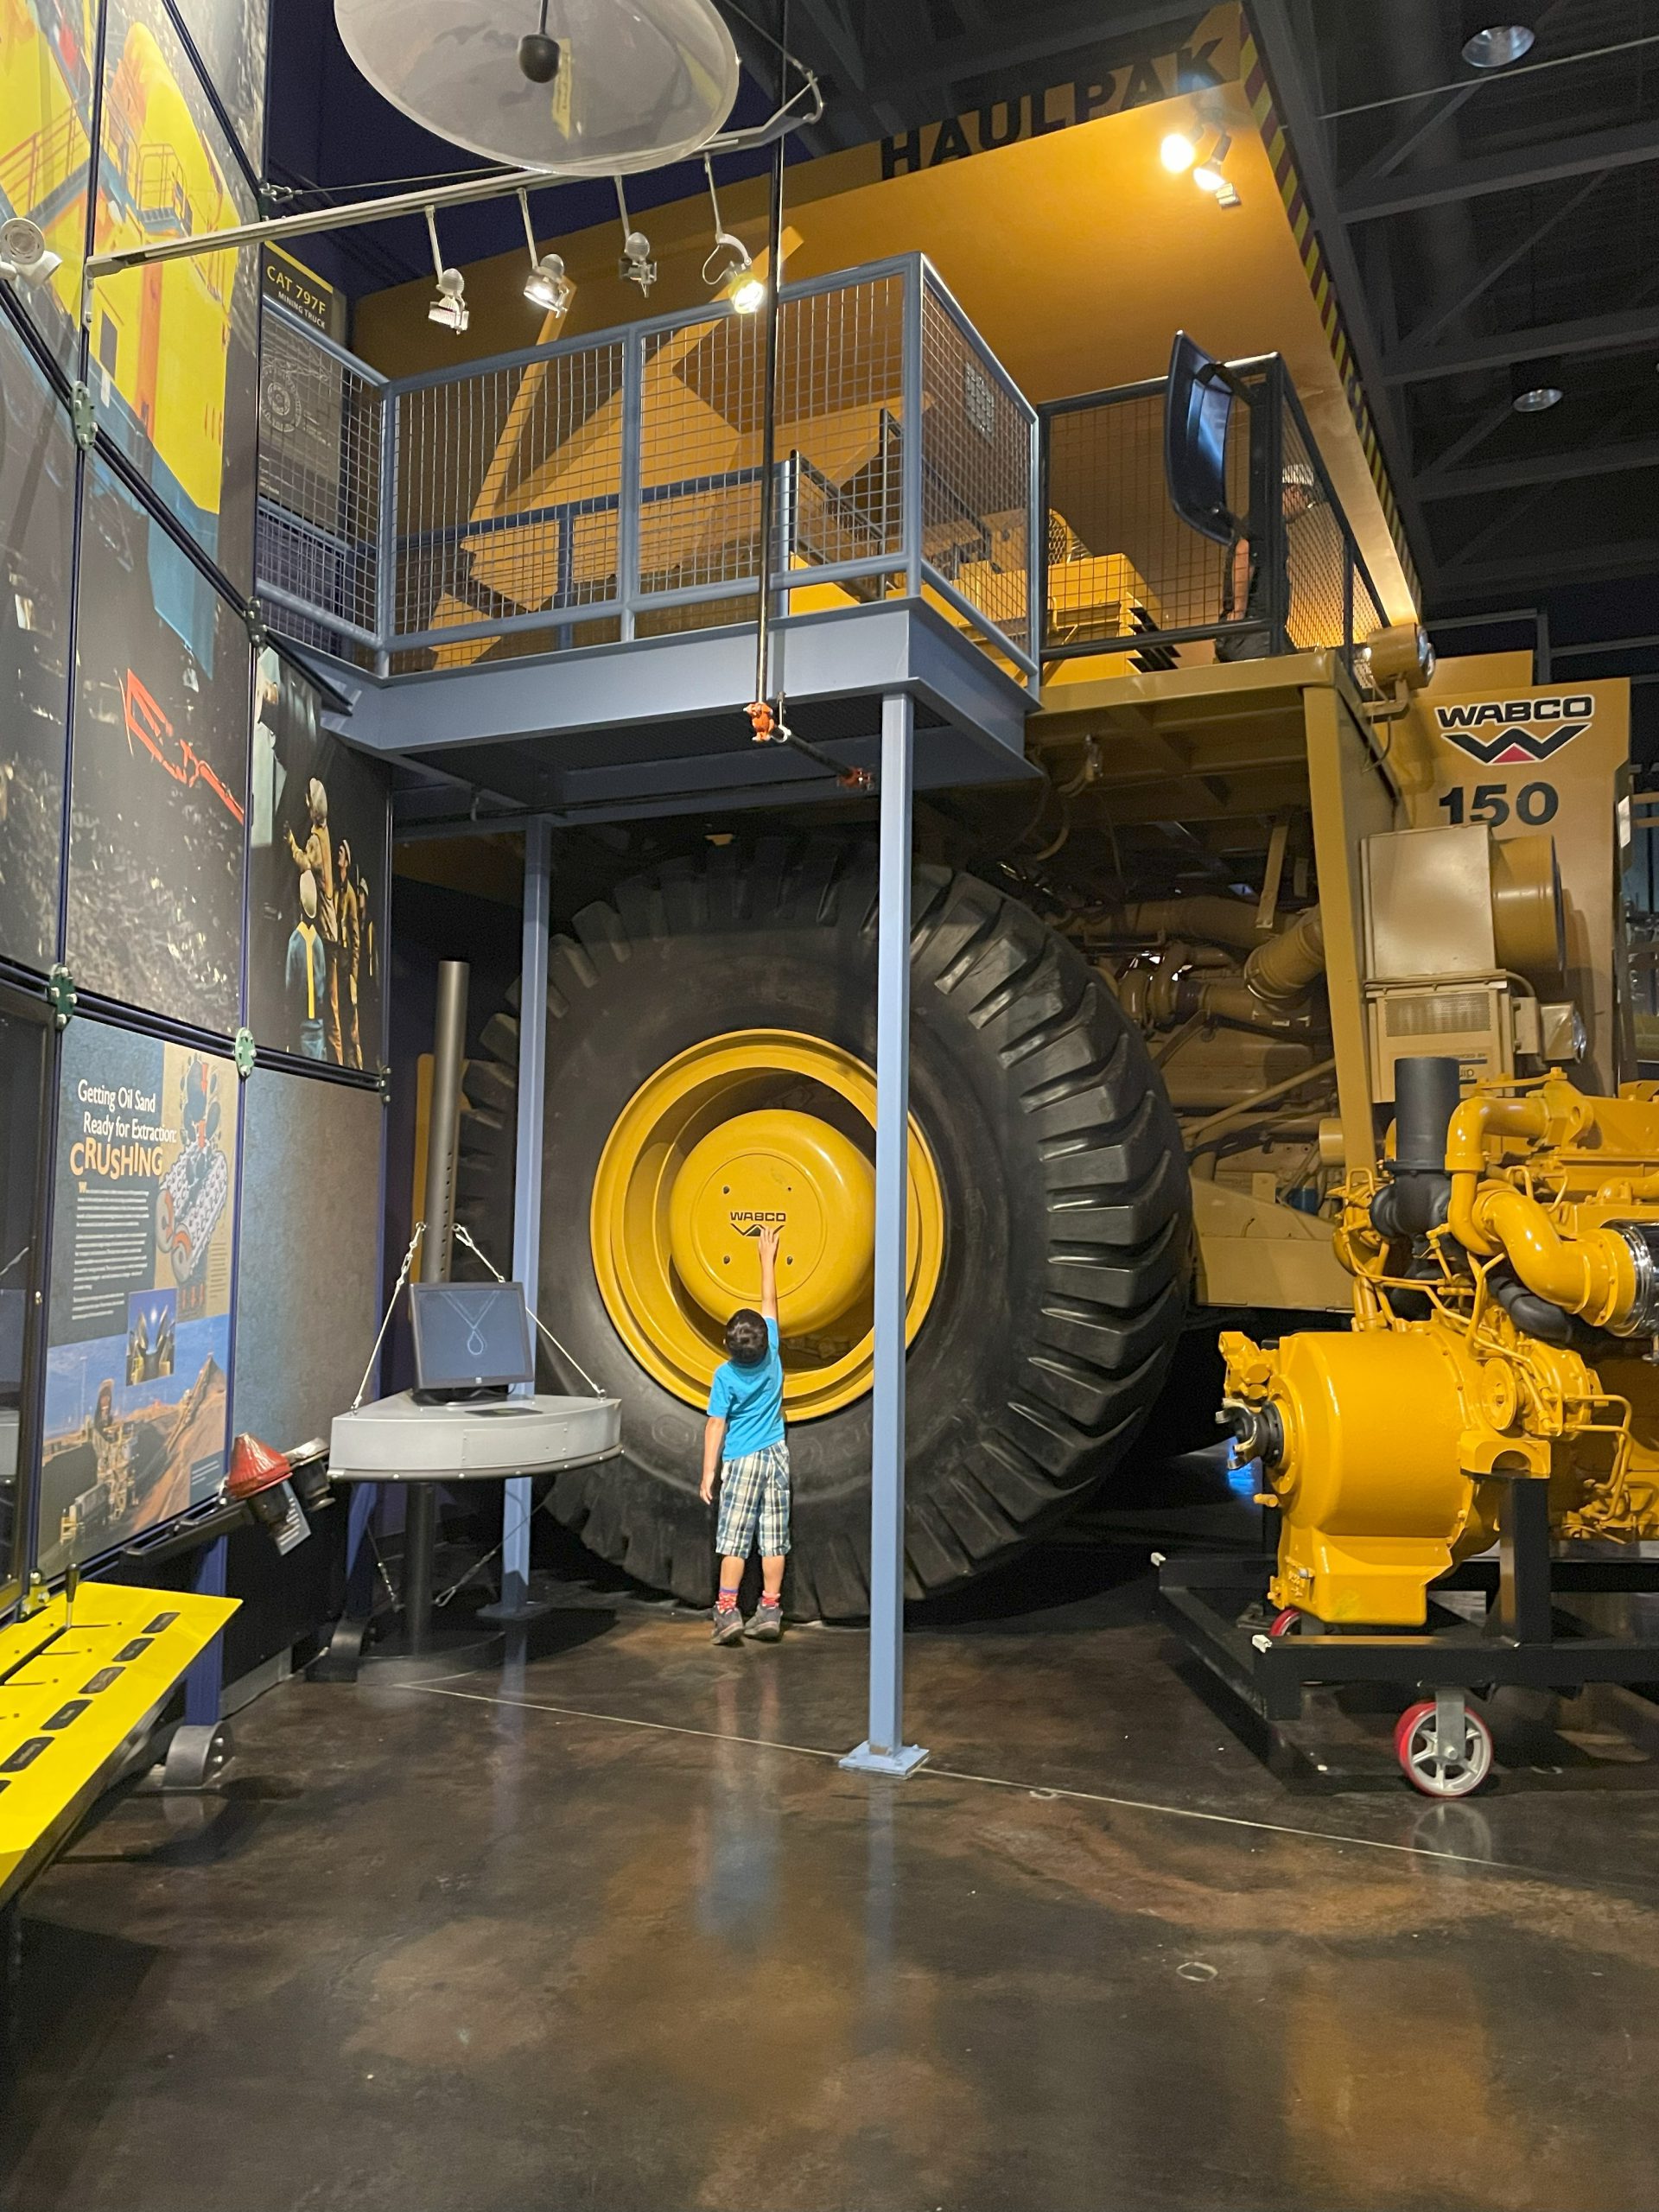 Oil Sands Discovery Centre Guide